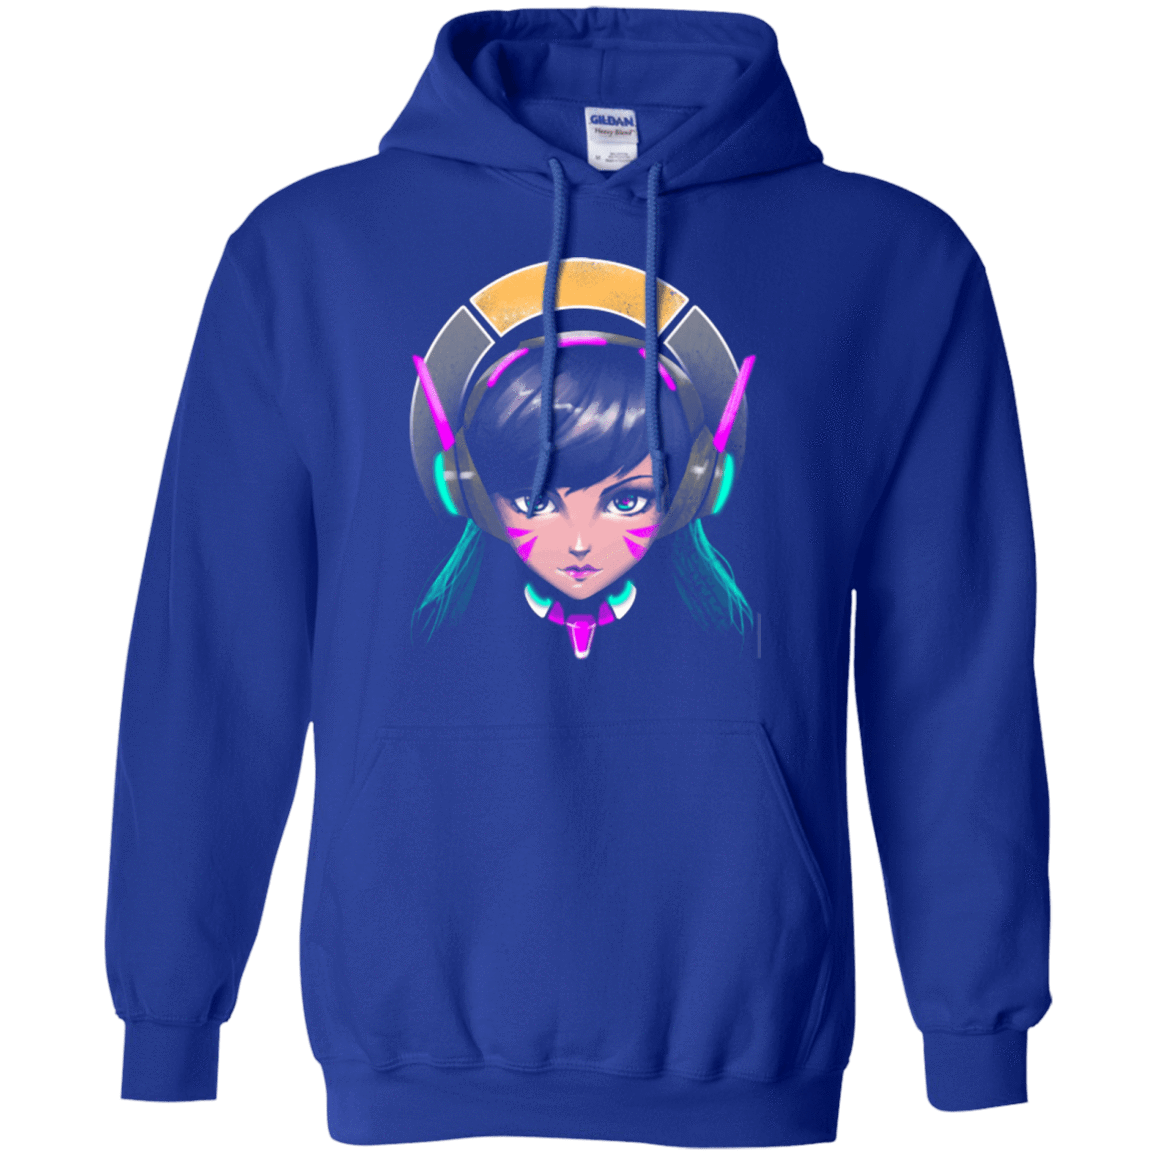 Sweatshirts Royal / Small The Gamer Pullover Hoodie